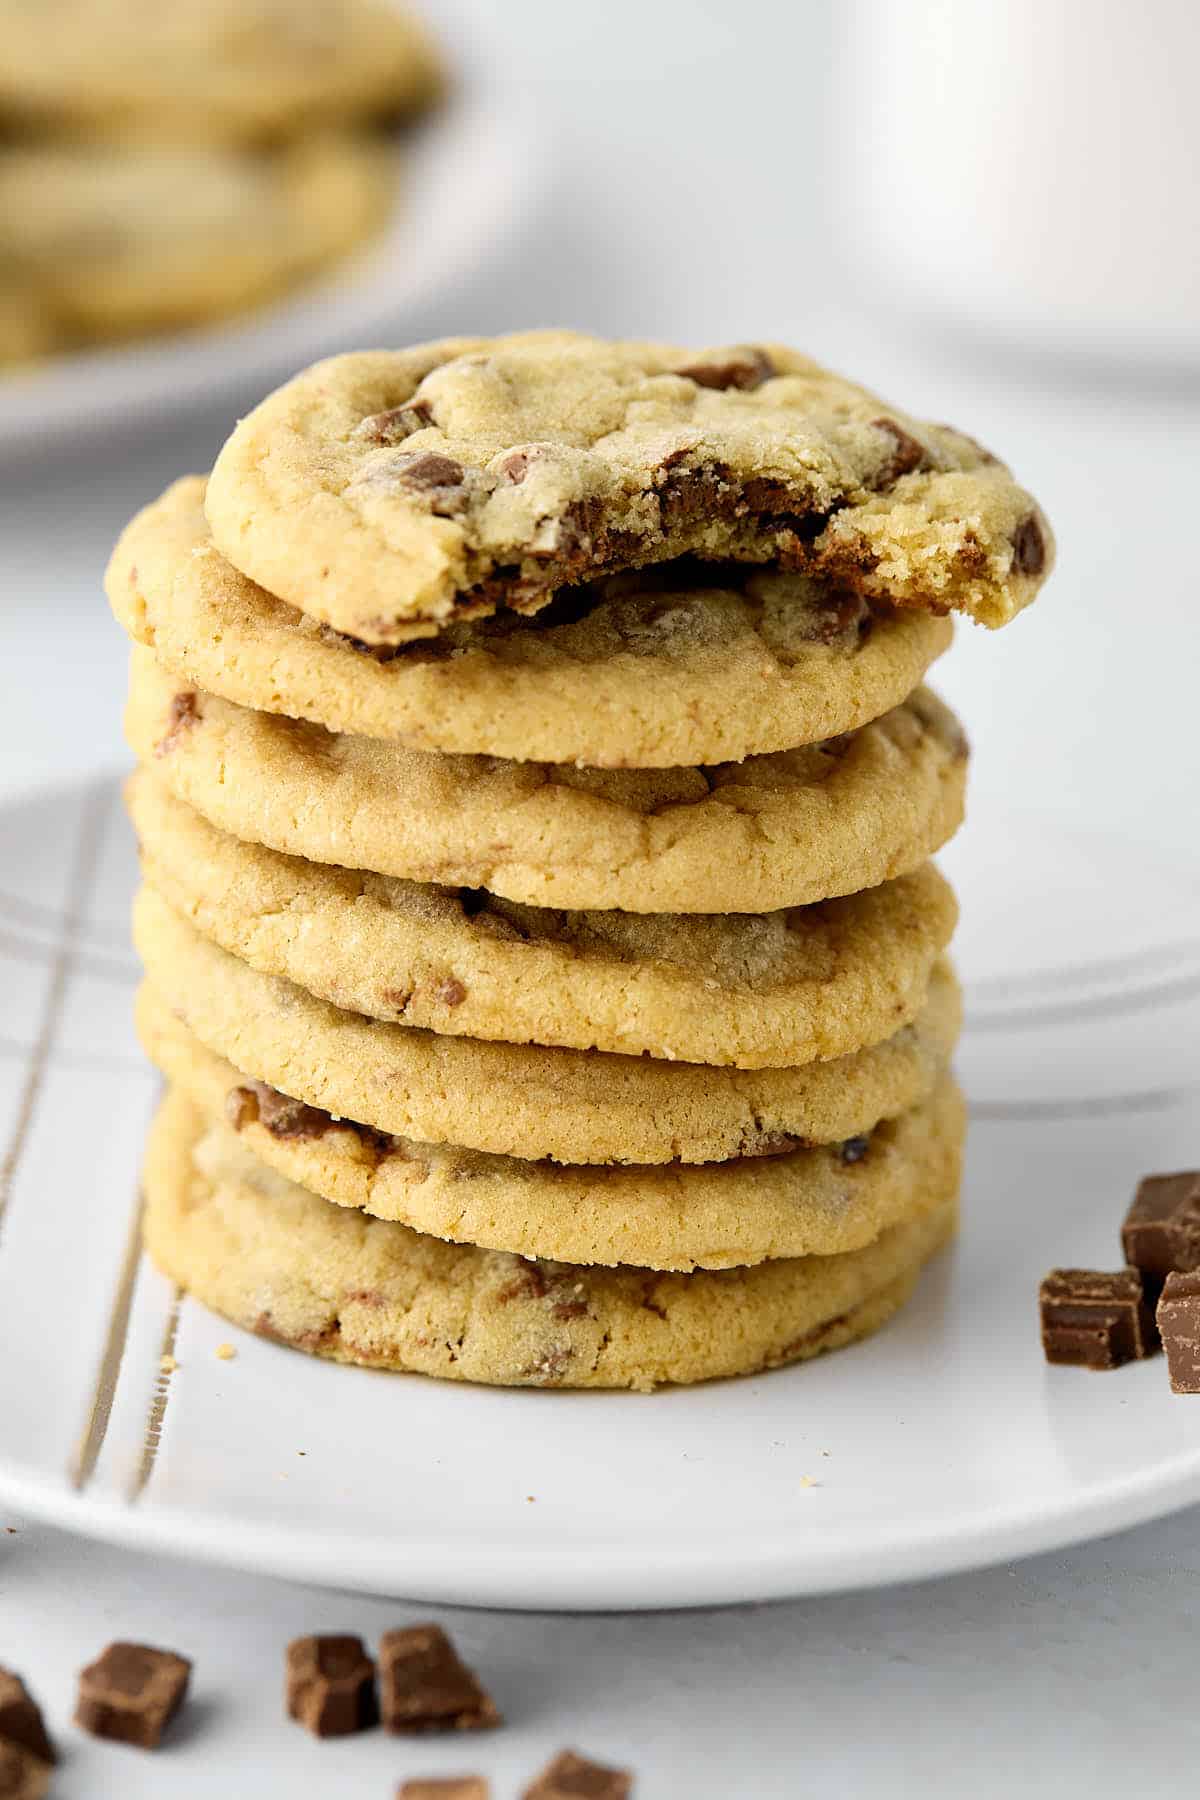 Stack of Hershey bar cookies with a bite taken out of the top cookies.